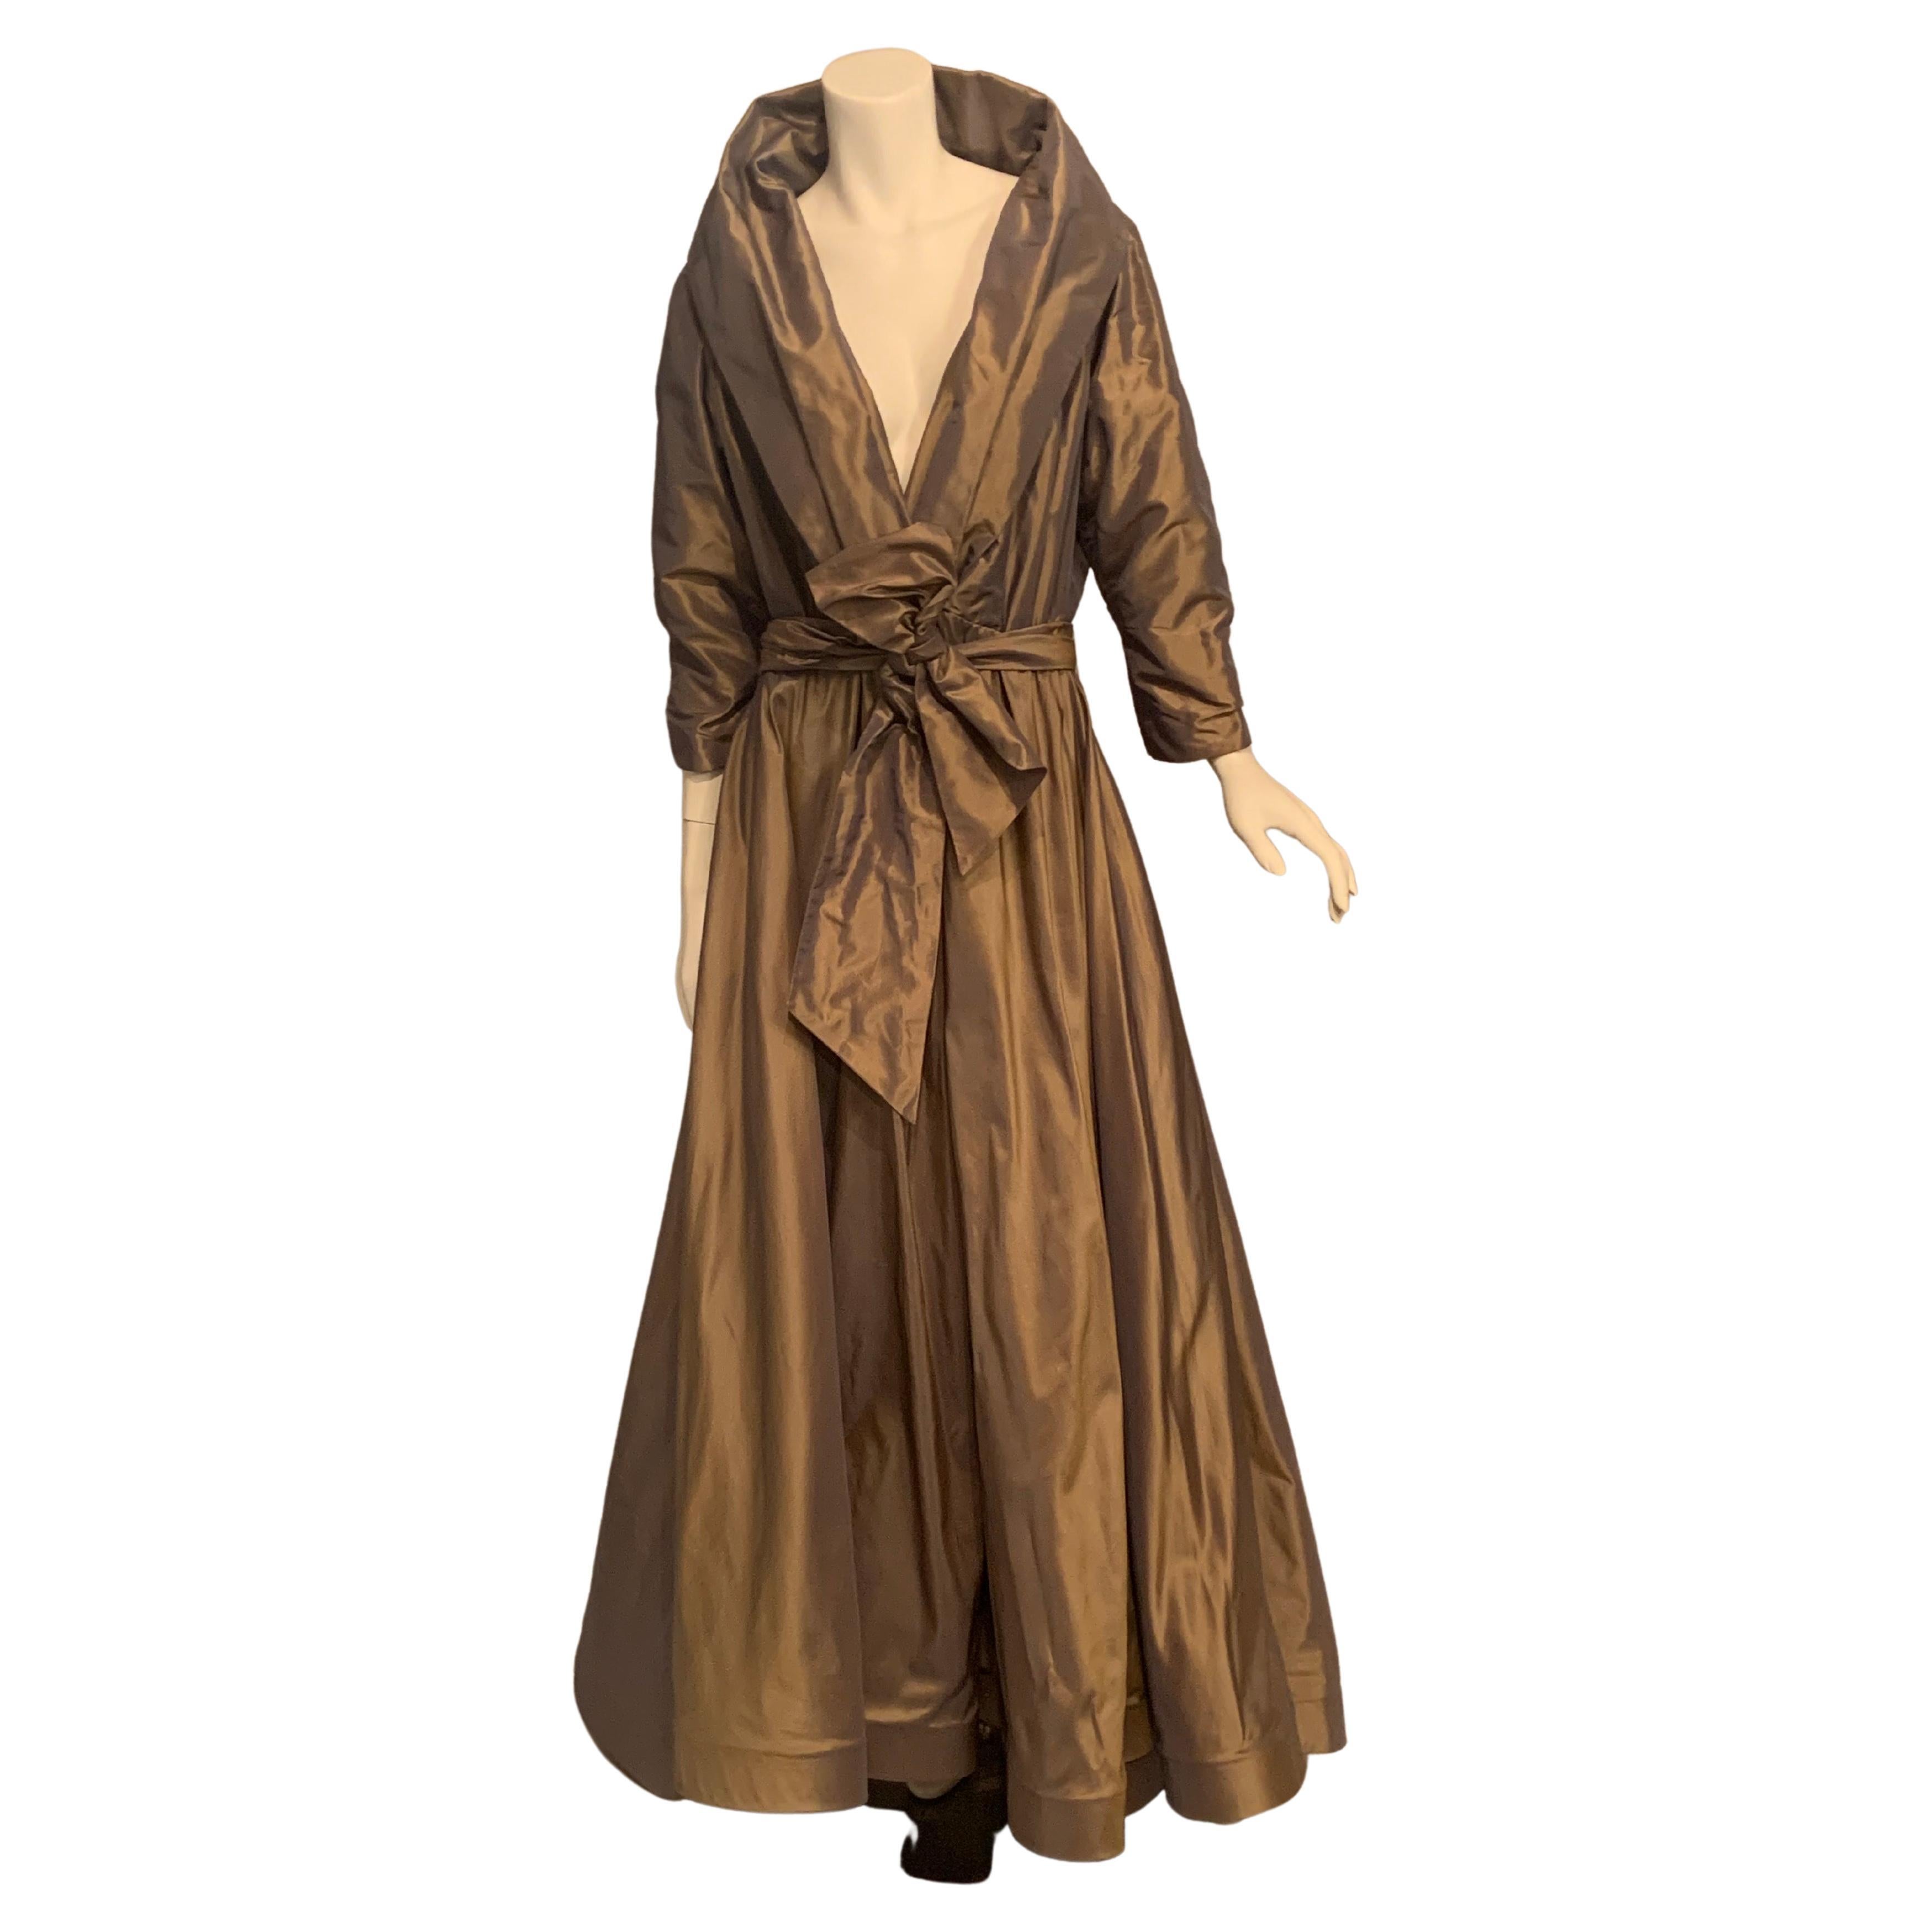 Catherine Regehr has chosen an unusual changeable silk taffeta for this evening dress.  The silk fabric appears to change color with the light and the movement of wearer.  This can be seen in the photos of the dress.  It has a generous shawl collar,